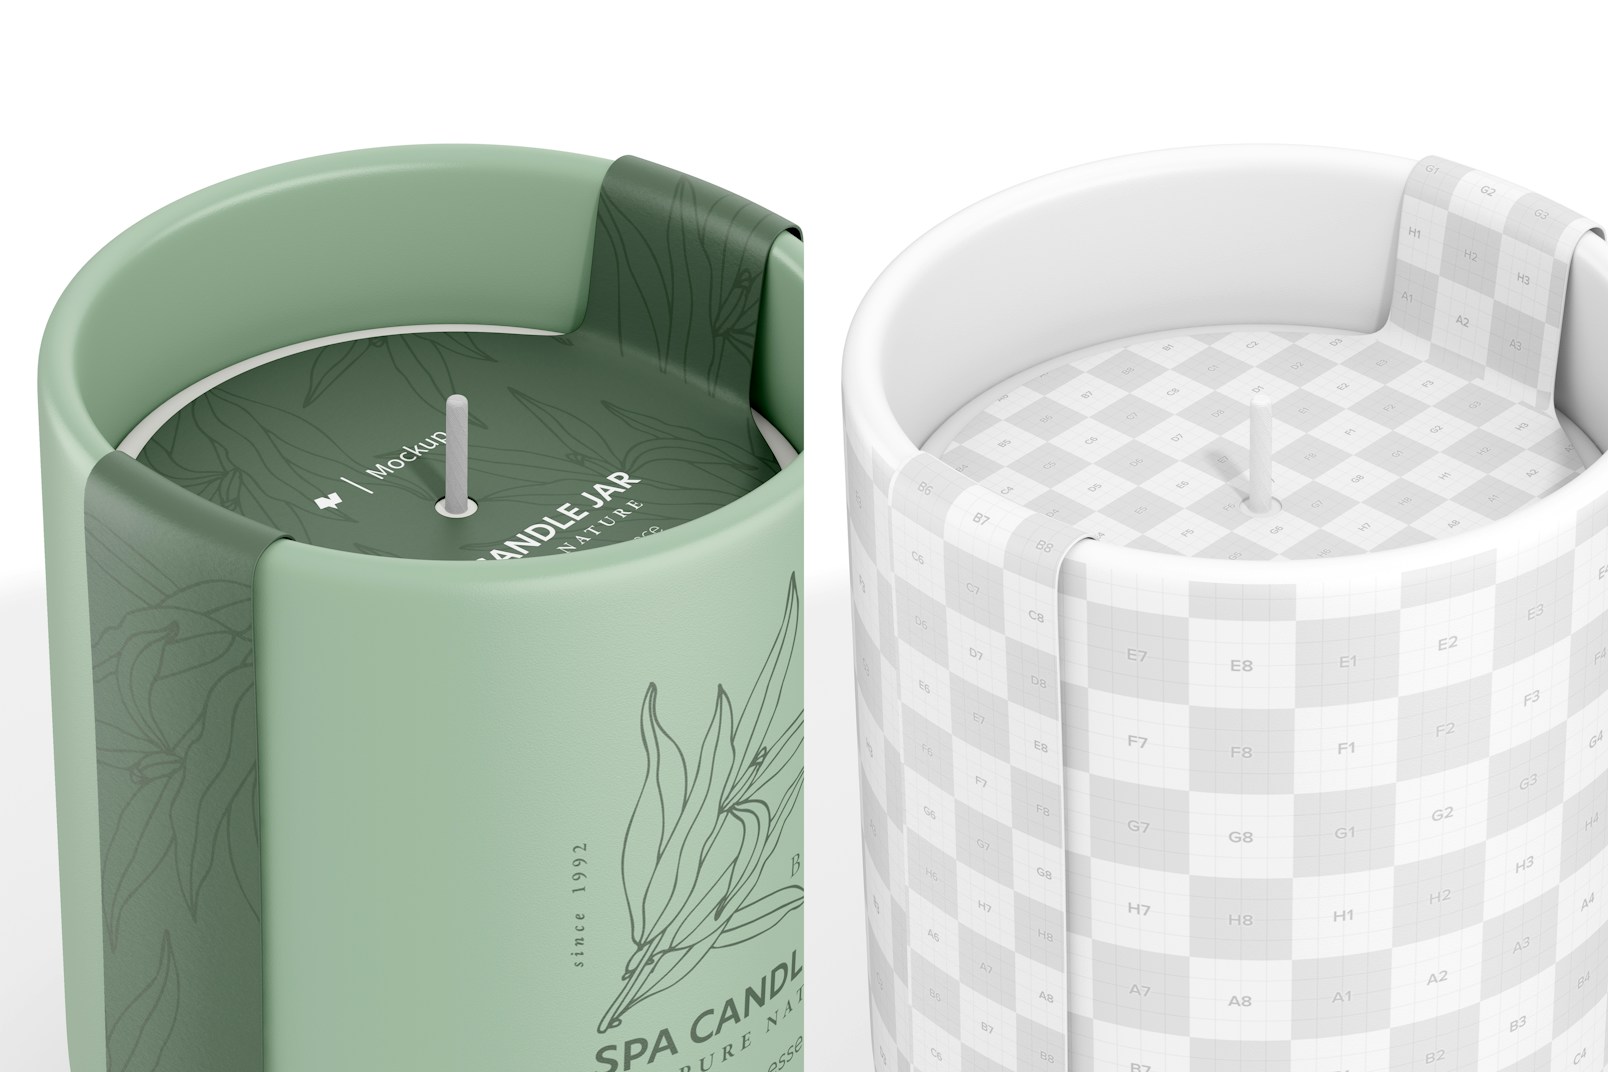 Spa Candle Jar with Label Mockup, Close Up